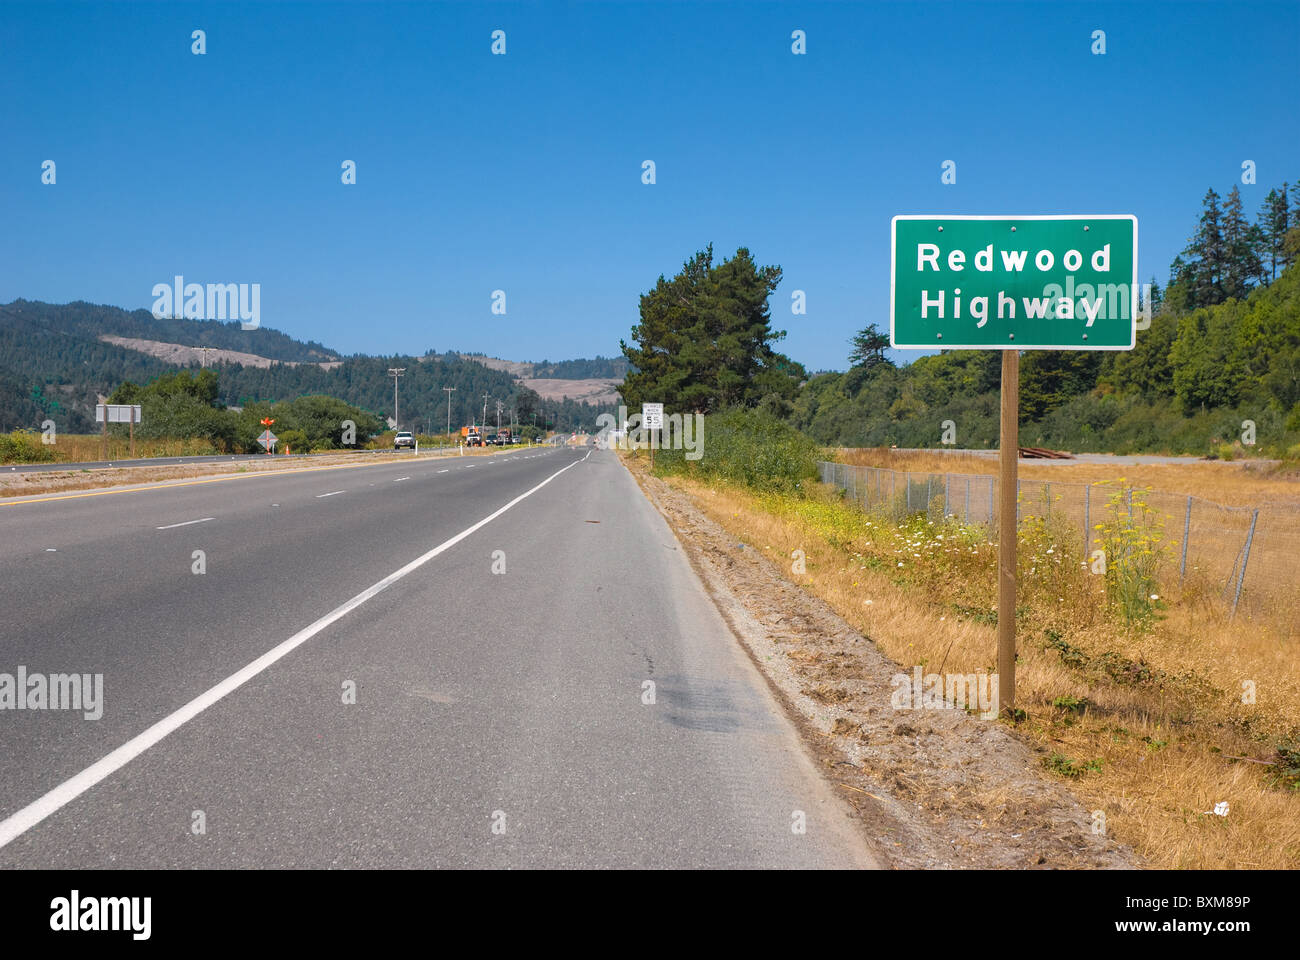 Redwood Highway sign on Hwy 101 in Northern California Stock Photo